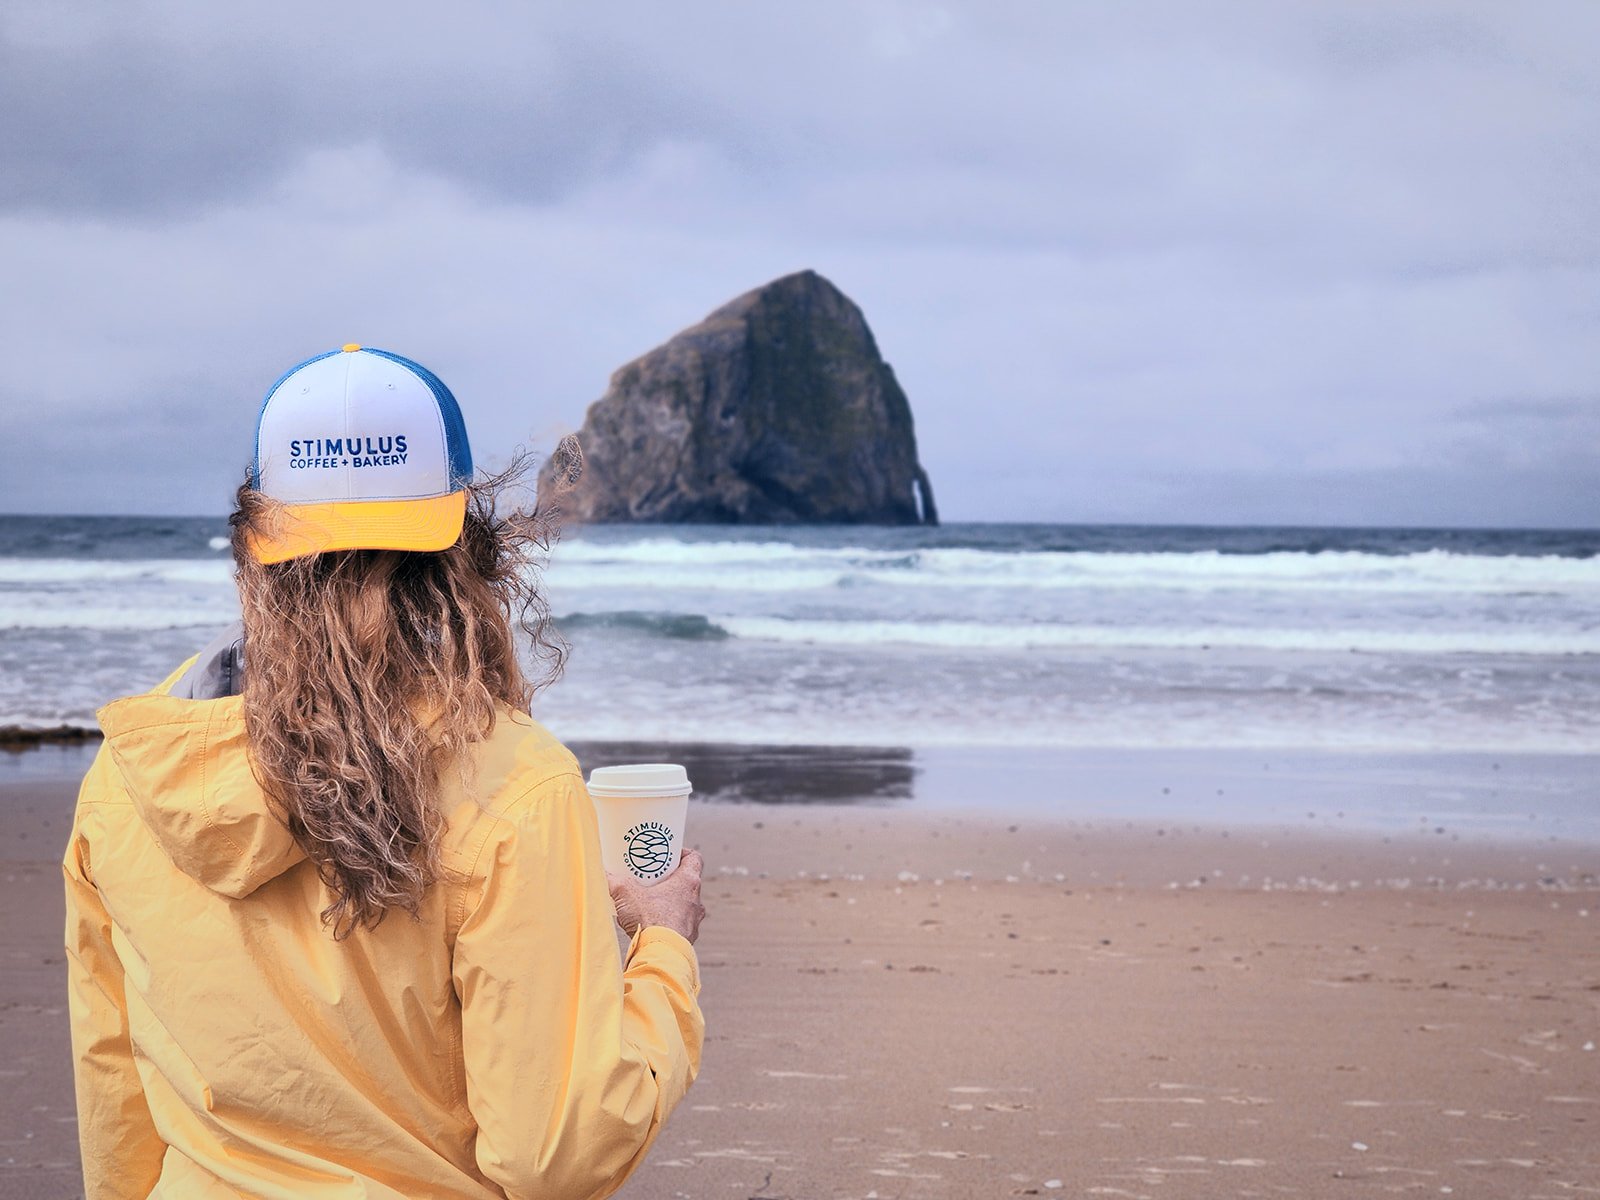 Amidst the ocean&rsquo;s melody 🌊 and the sun&rsquo;s ⛅ gentle embrace, Pacific City&rsquo;s cherished beach spot invites you to a tranquil escape~ Don't forget to stop at Stimulus Coffee + Bakery for your favorite brew and bite!

#coffeeandwaves #s